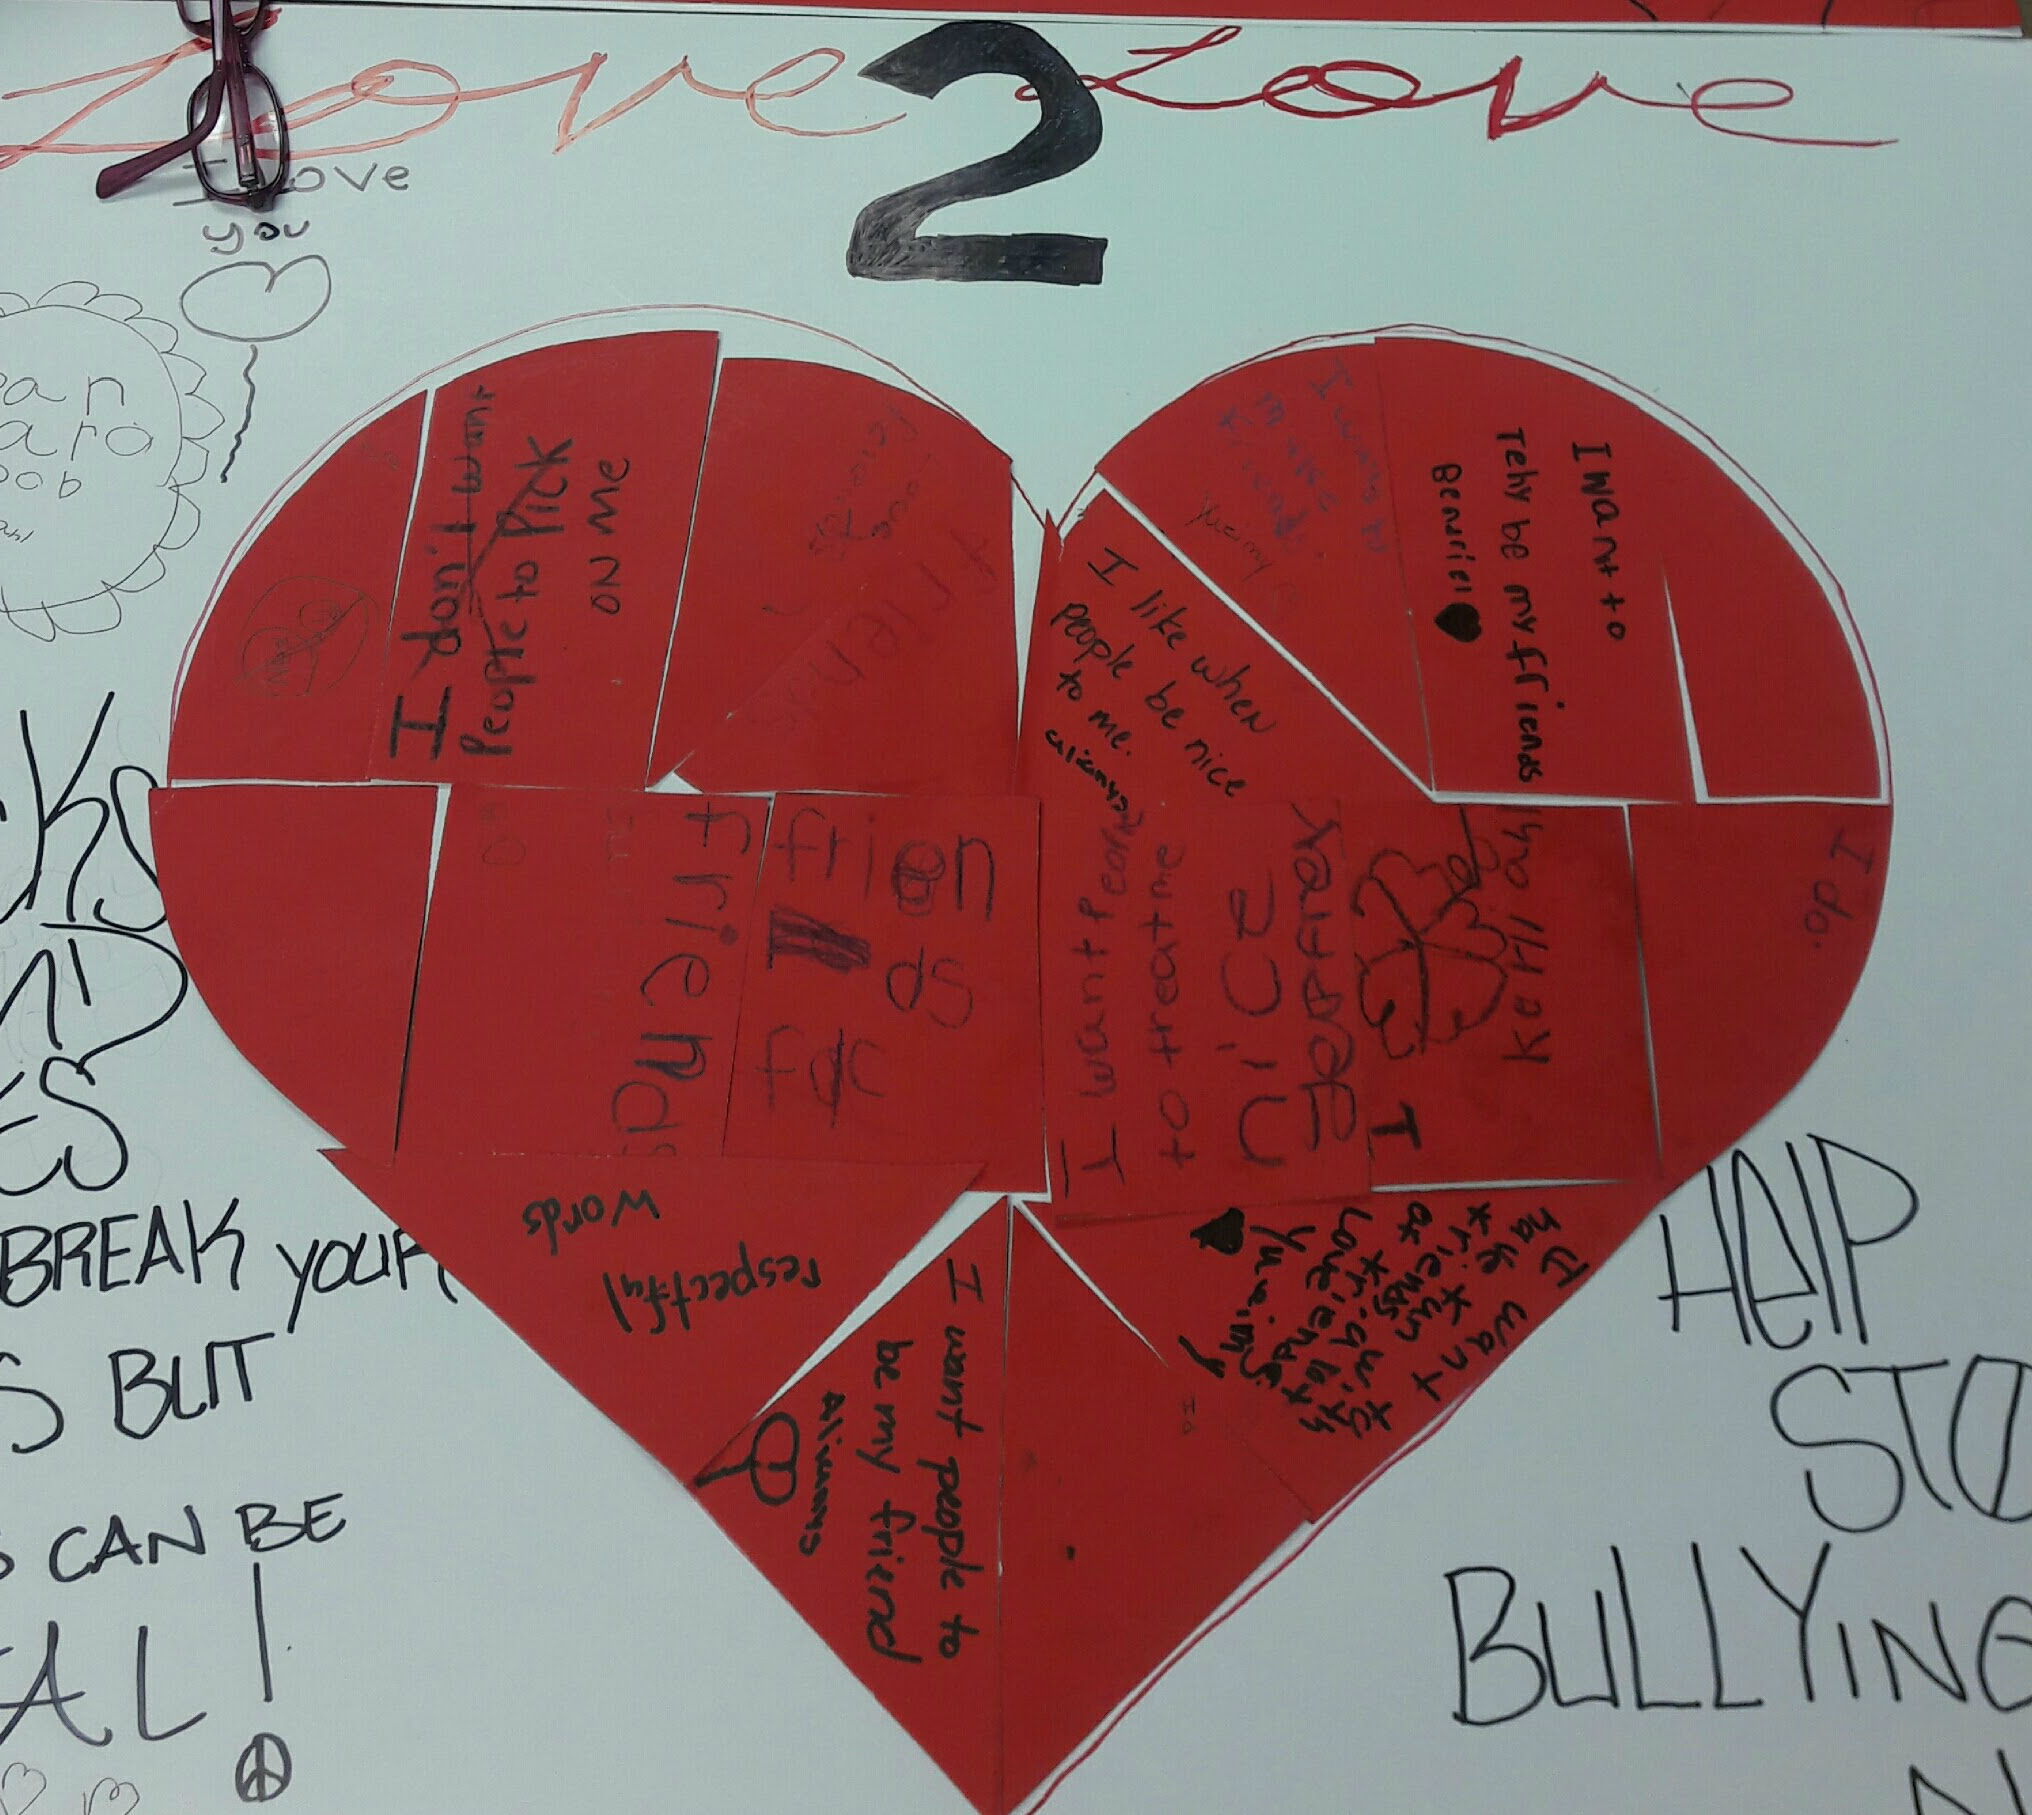 This poster was part of Rosado's anti-bullying project.